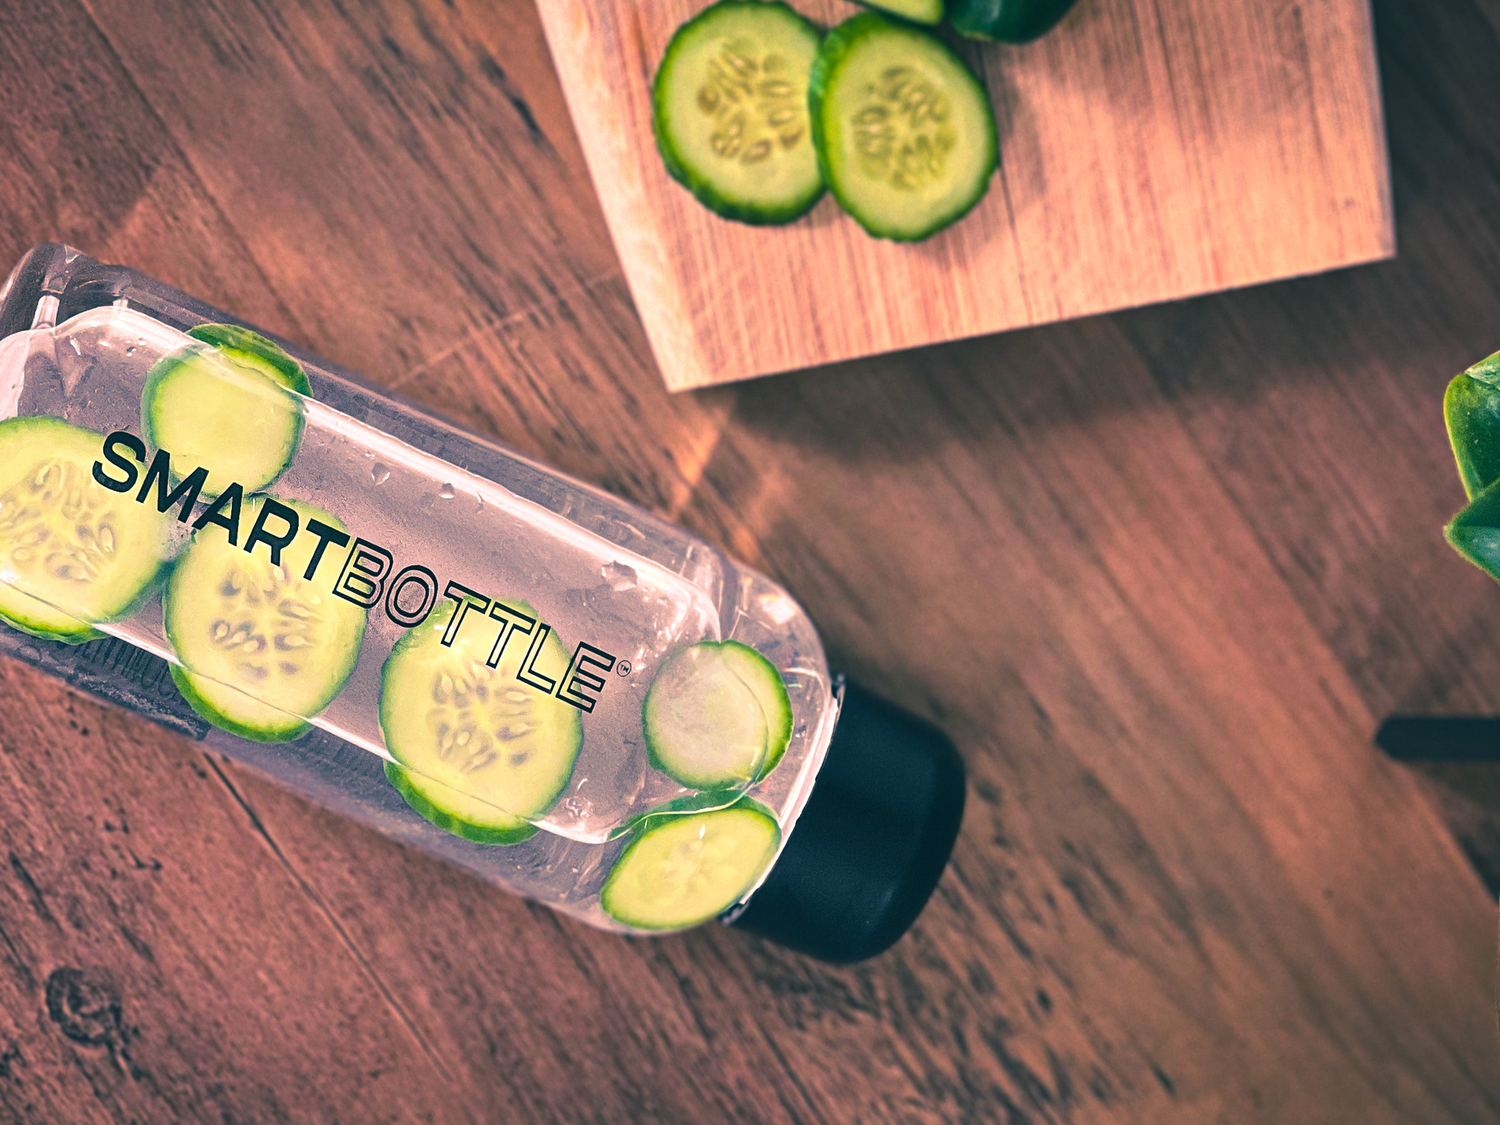 Smartbottle on top of a wooden table with cucumber concoction